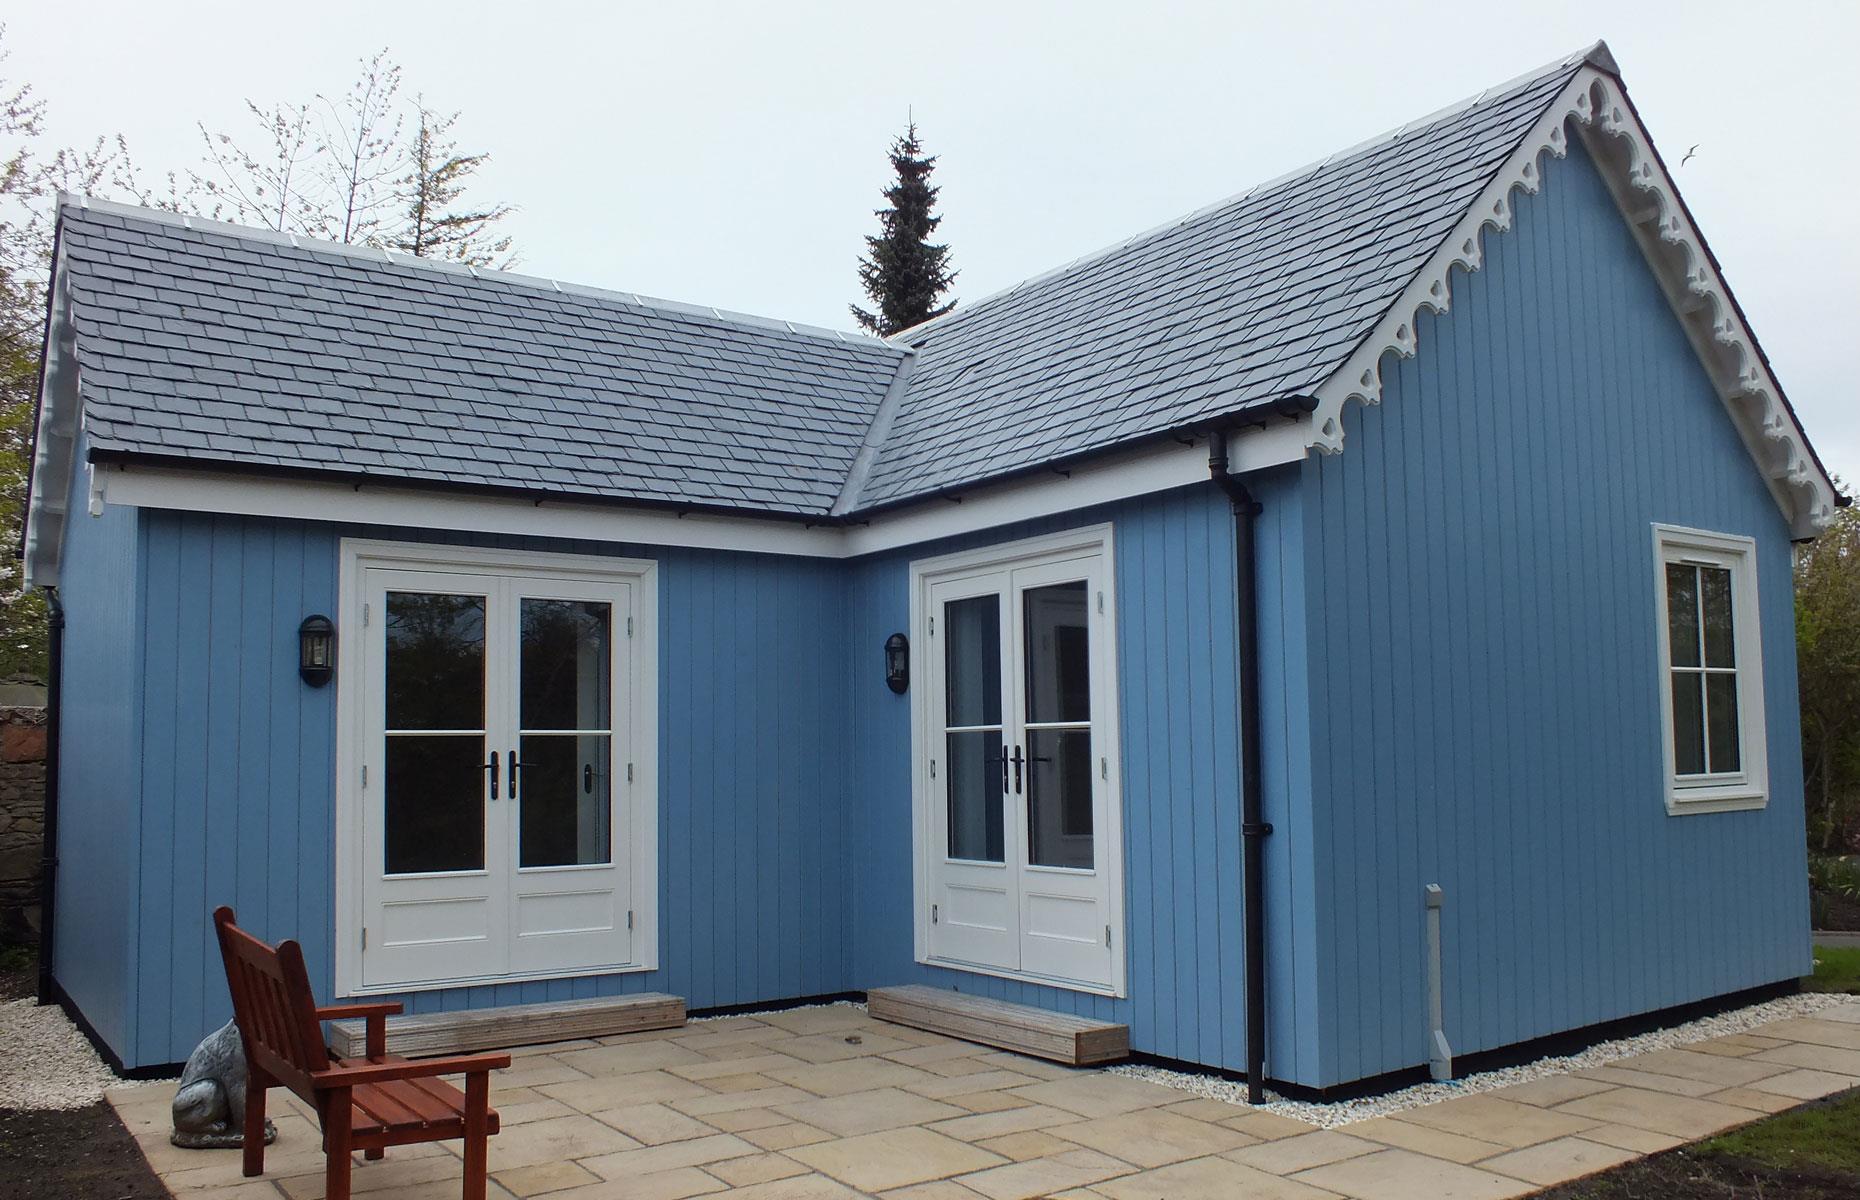 The Wee House Company one-bed house: £75,000 ($109k)